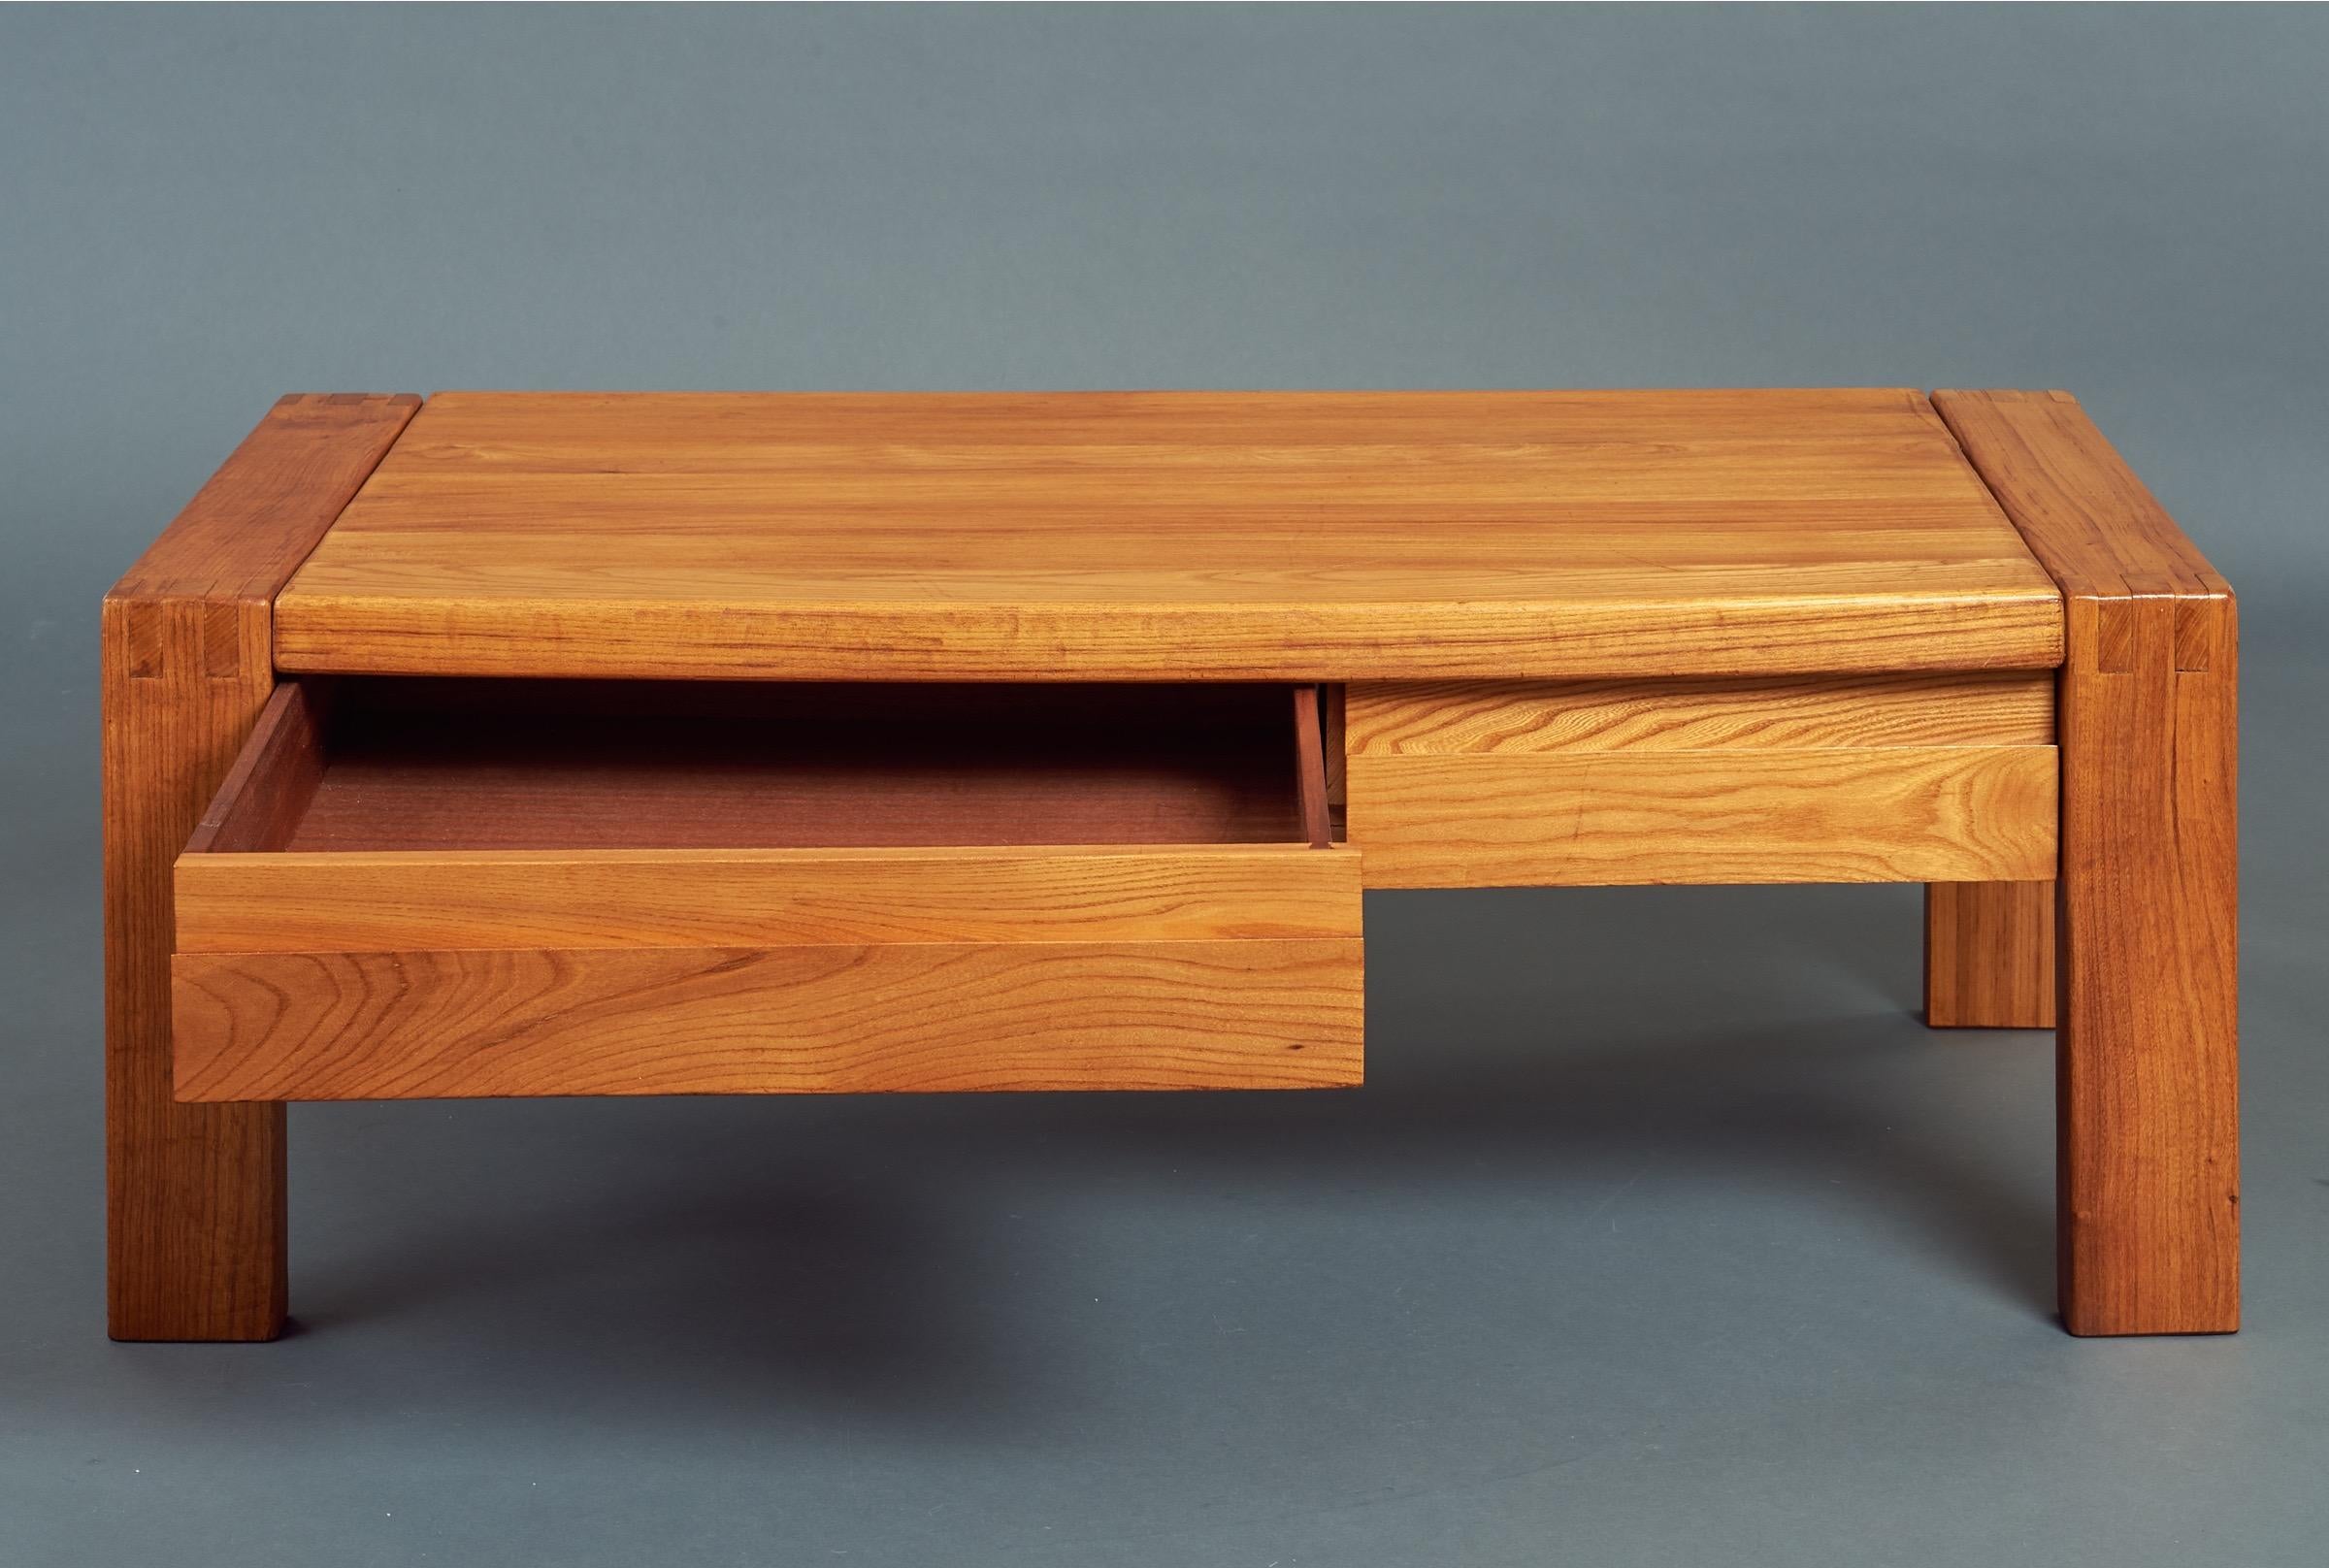 French Pierre Chapo, Large Oak Coffee Table with Decorative Joinery, France 1960's